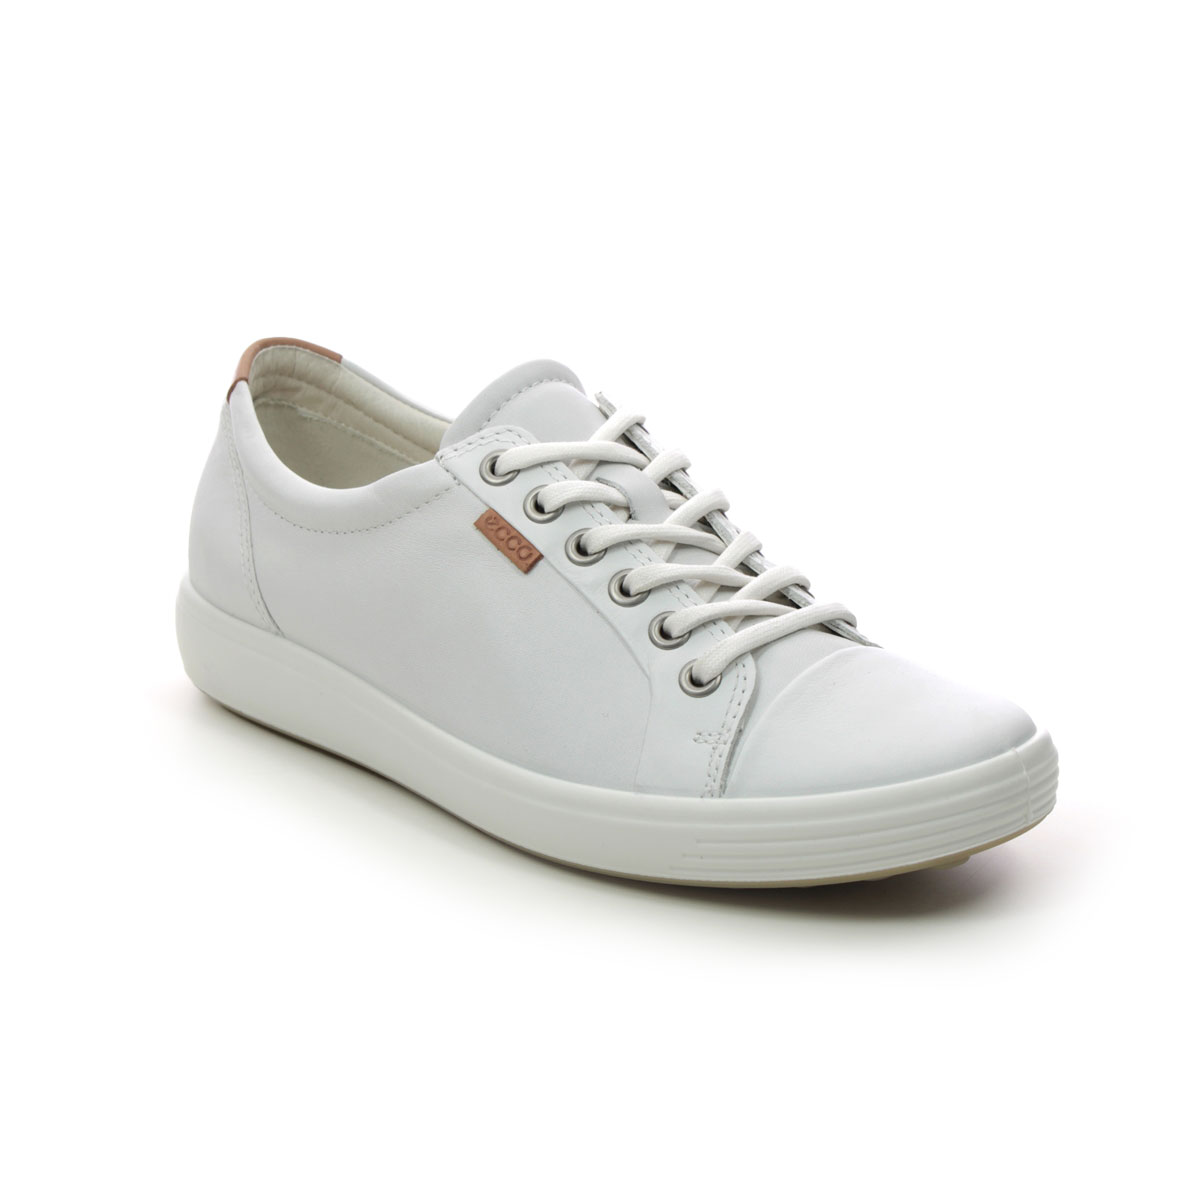 Ecco Soft 7 Lace White Leather Womens Trainers 430003-01007 In Size 38 In Plain White Leather